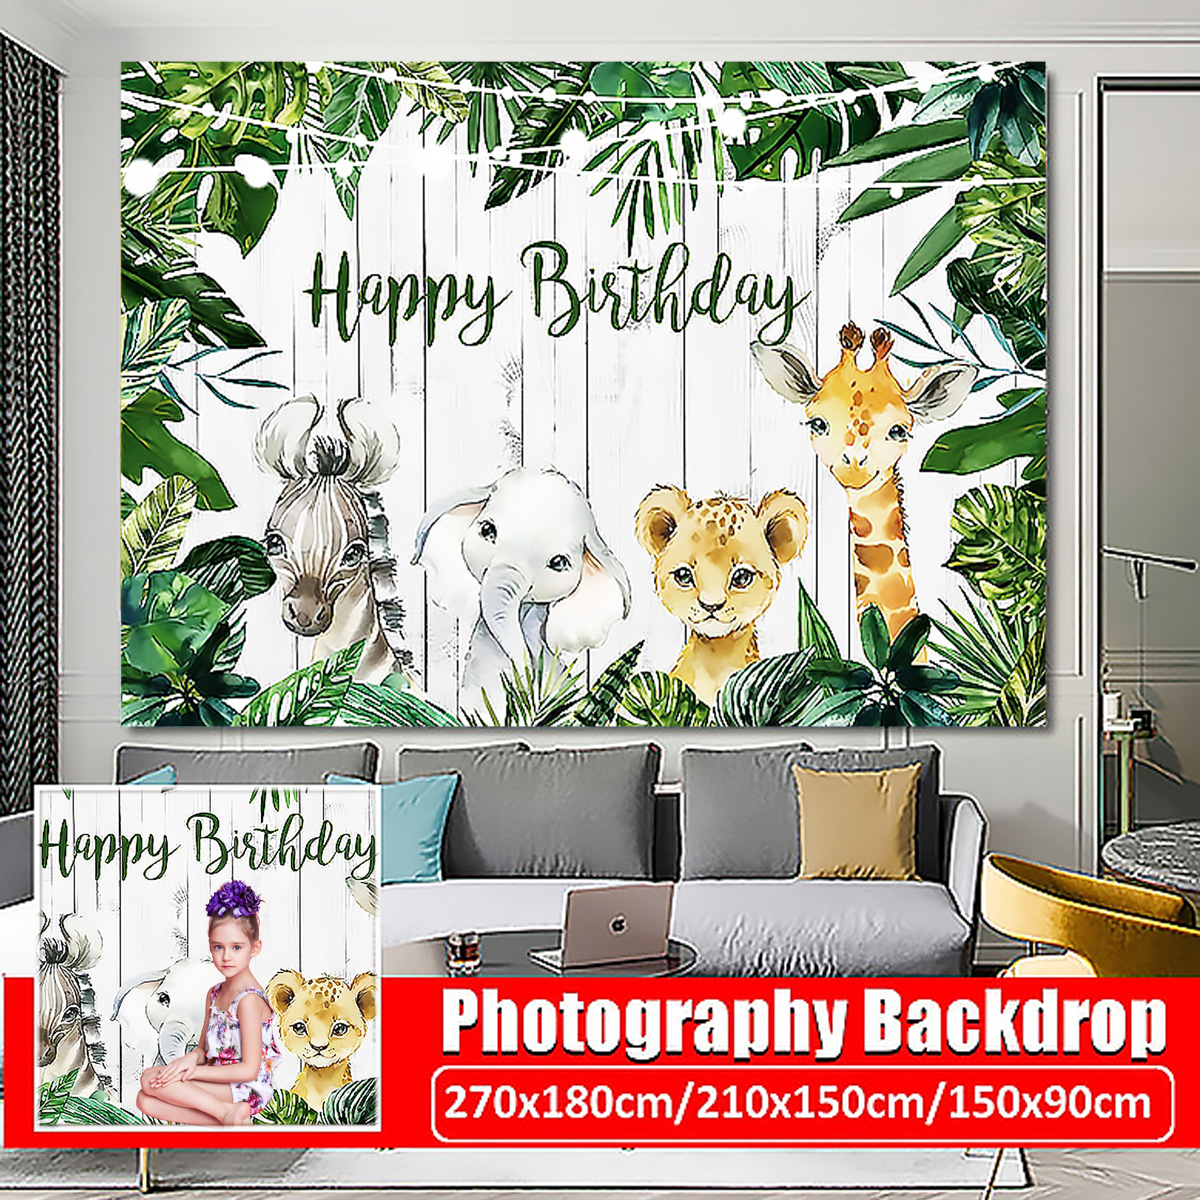 3-Size-Jungle-Green-Forest-Backdrop-Happy-Birthday-Background-Photography-Woodland-Party-Prop-1876181-1